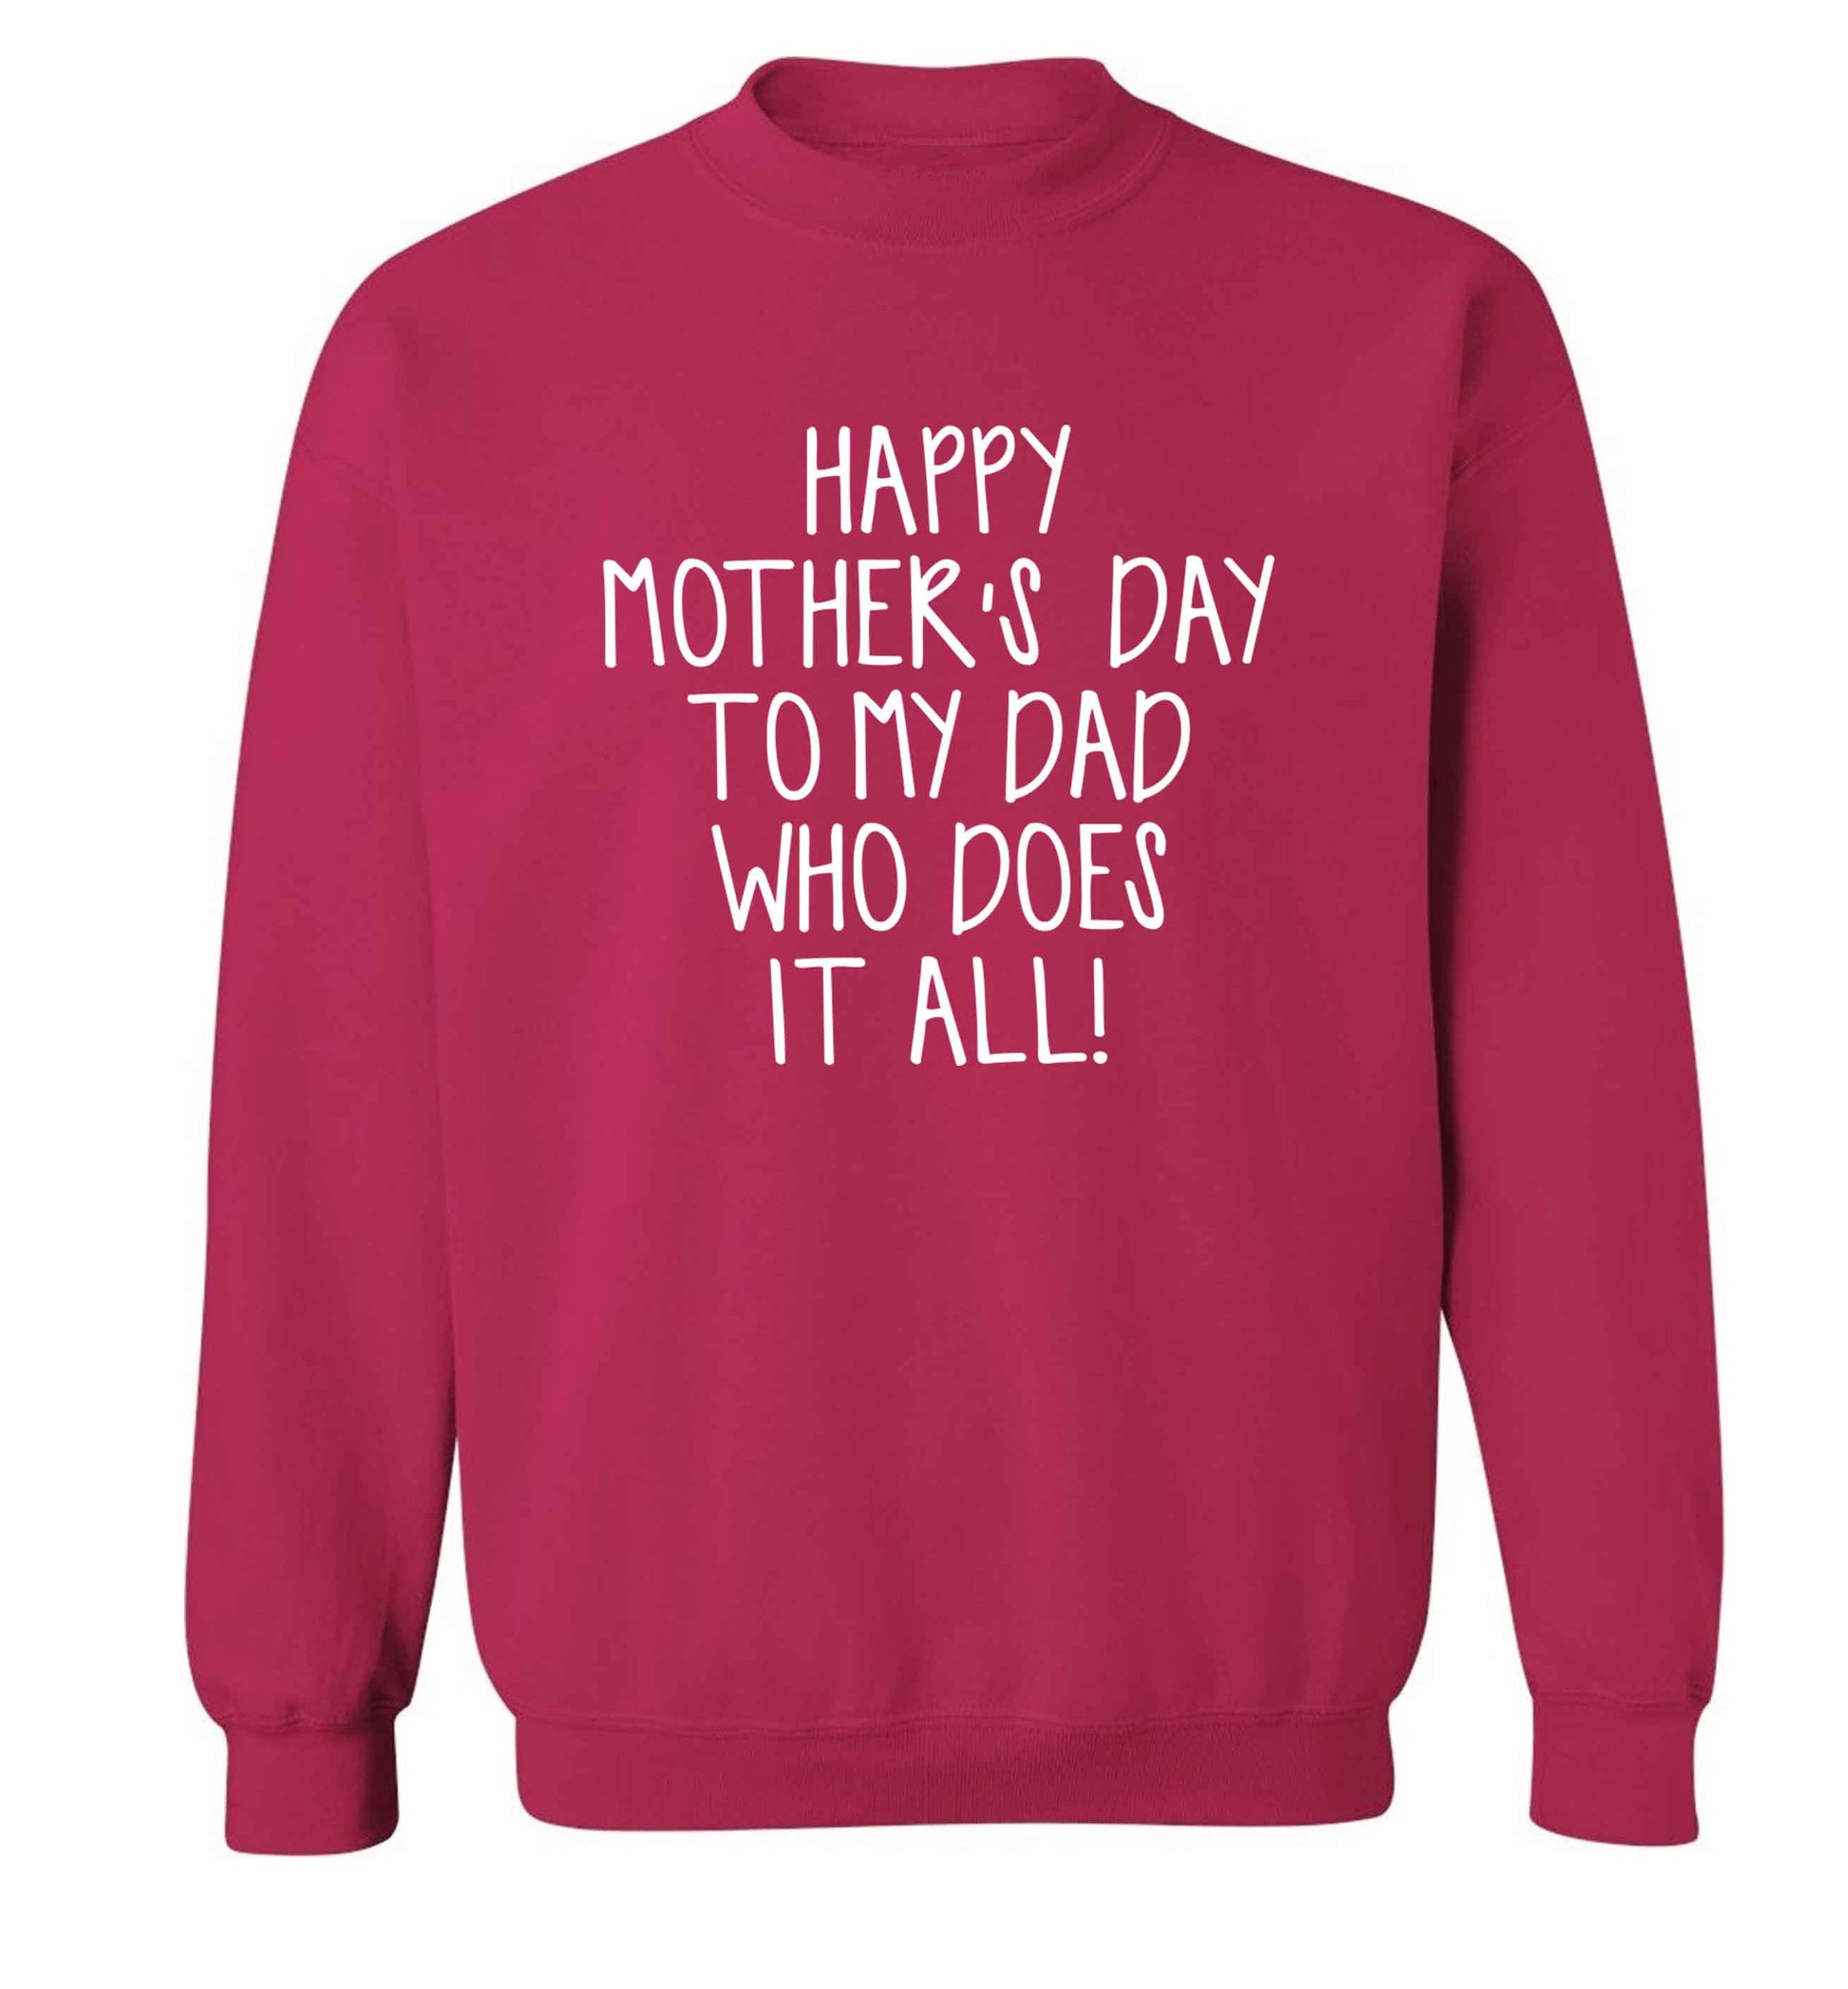 Happy mother's day to my dad who does it all! adult's unisex pink sweater 2XL